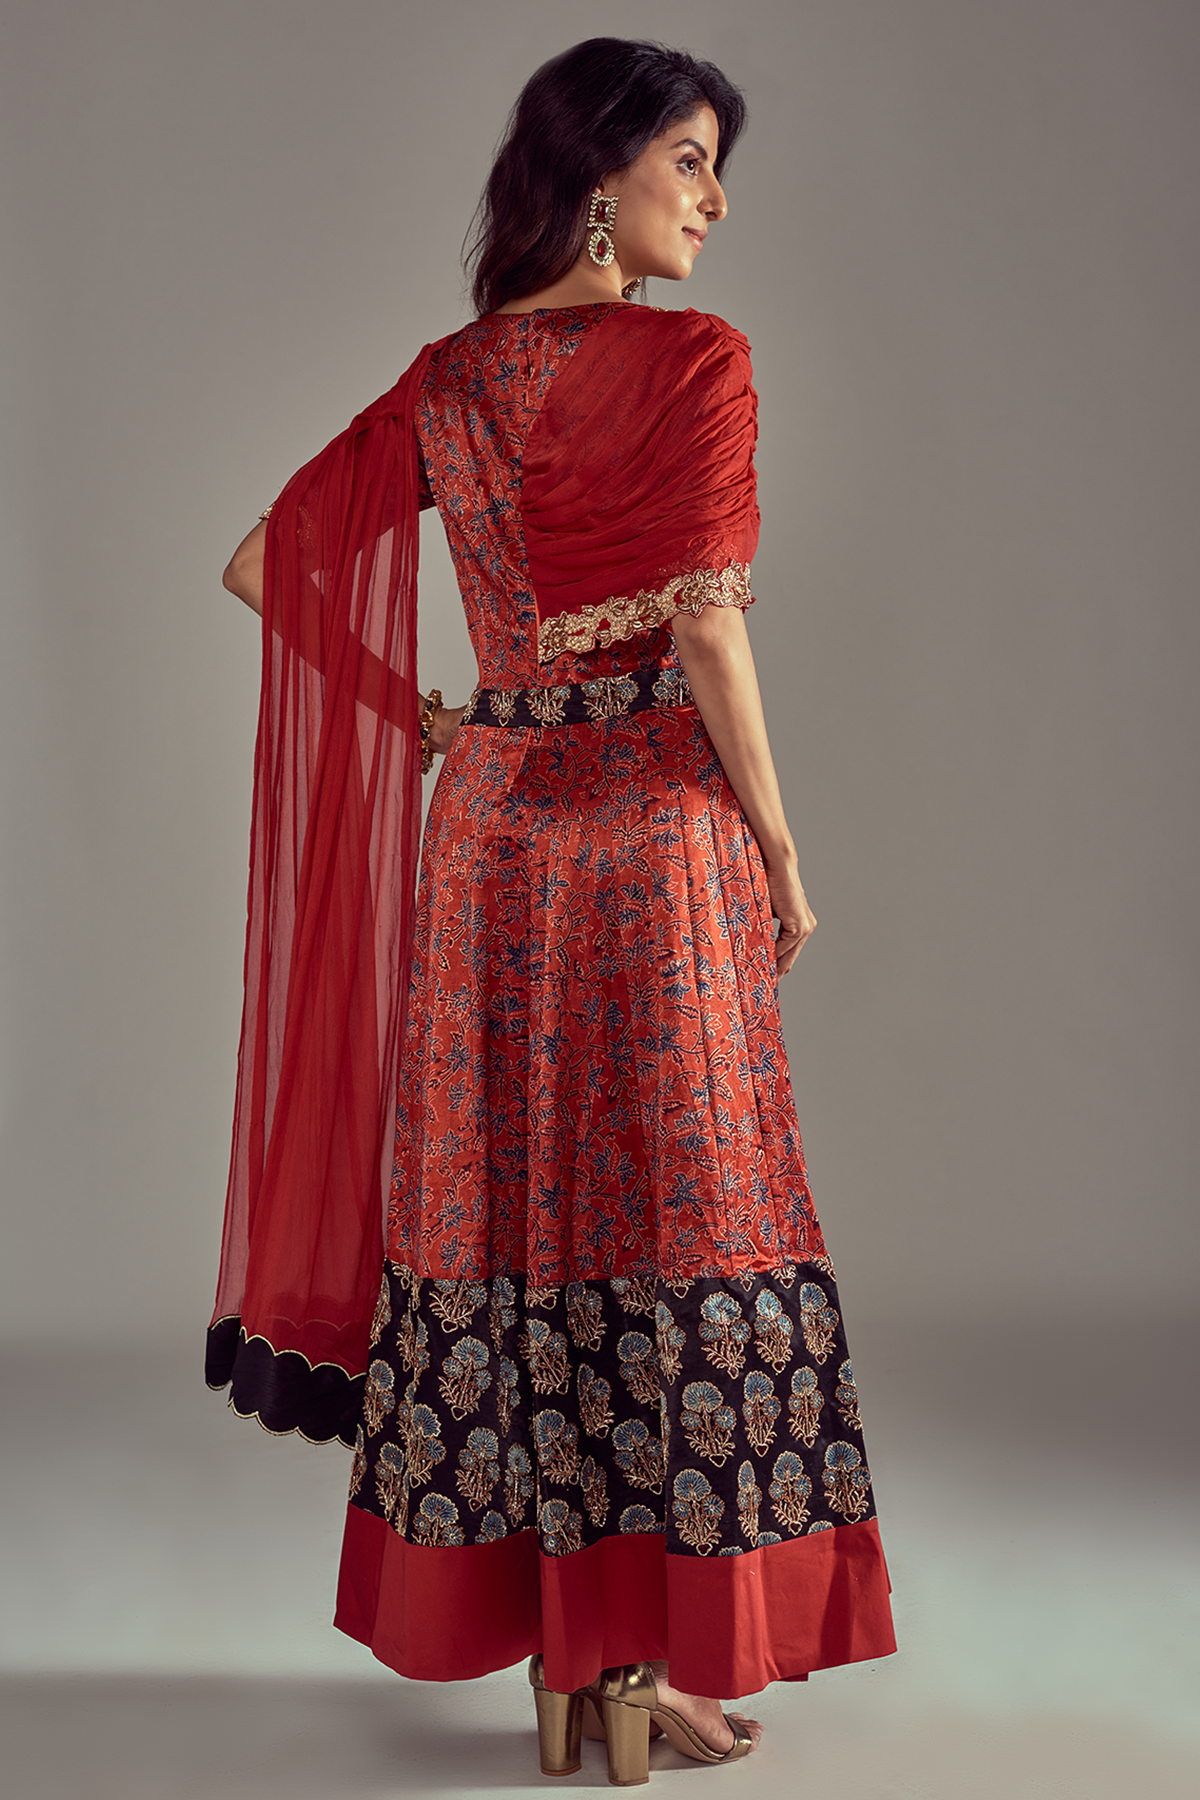 "Stunning Scarlet Red Mashru Silk Ajrakh Anarkali with Heavy Embroidered Border, enhanced with a Draped Dupatta and Belt for a regal look."